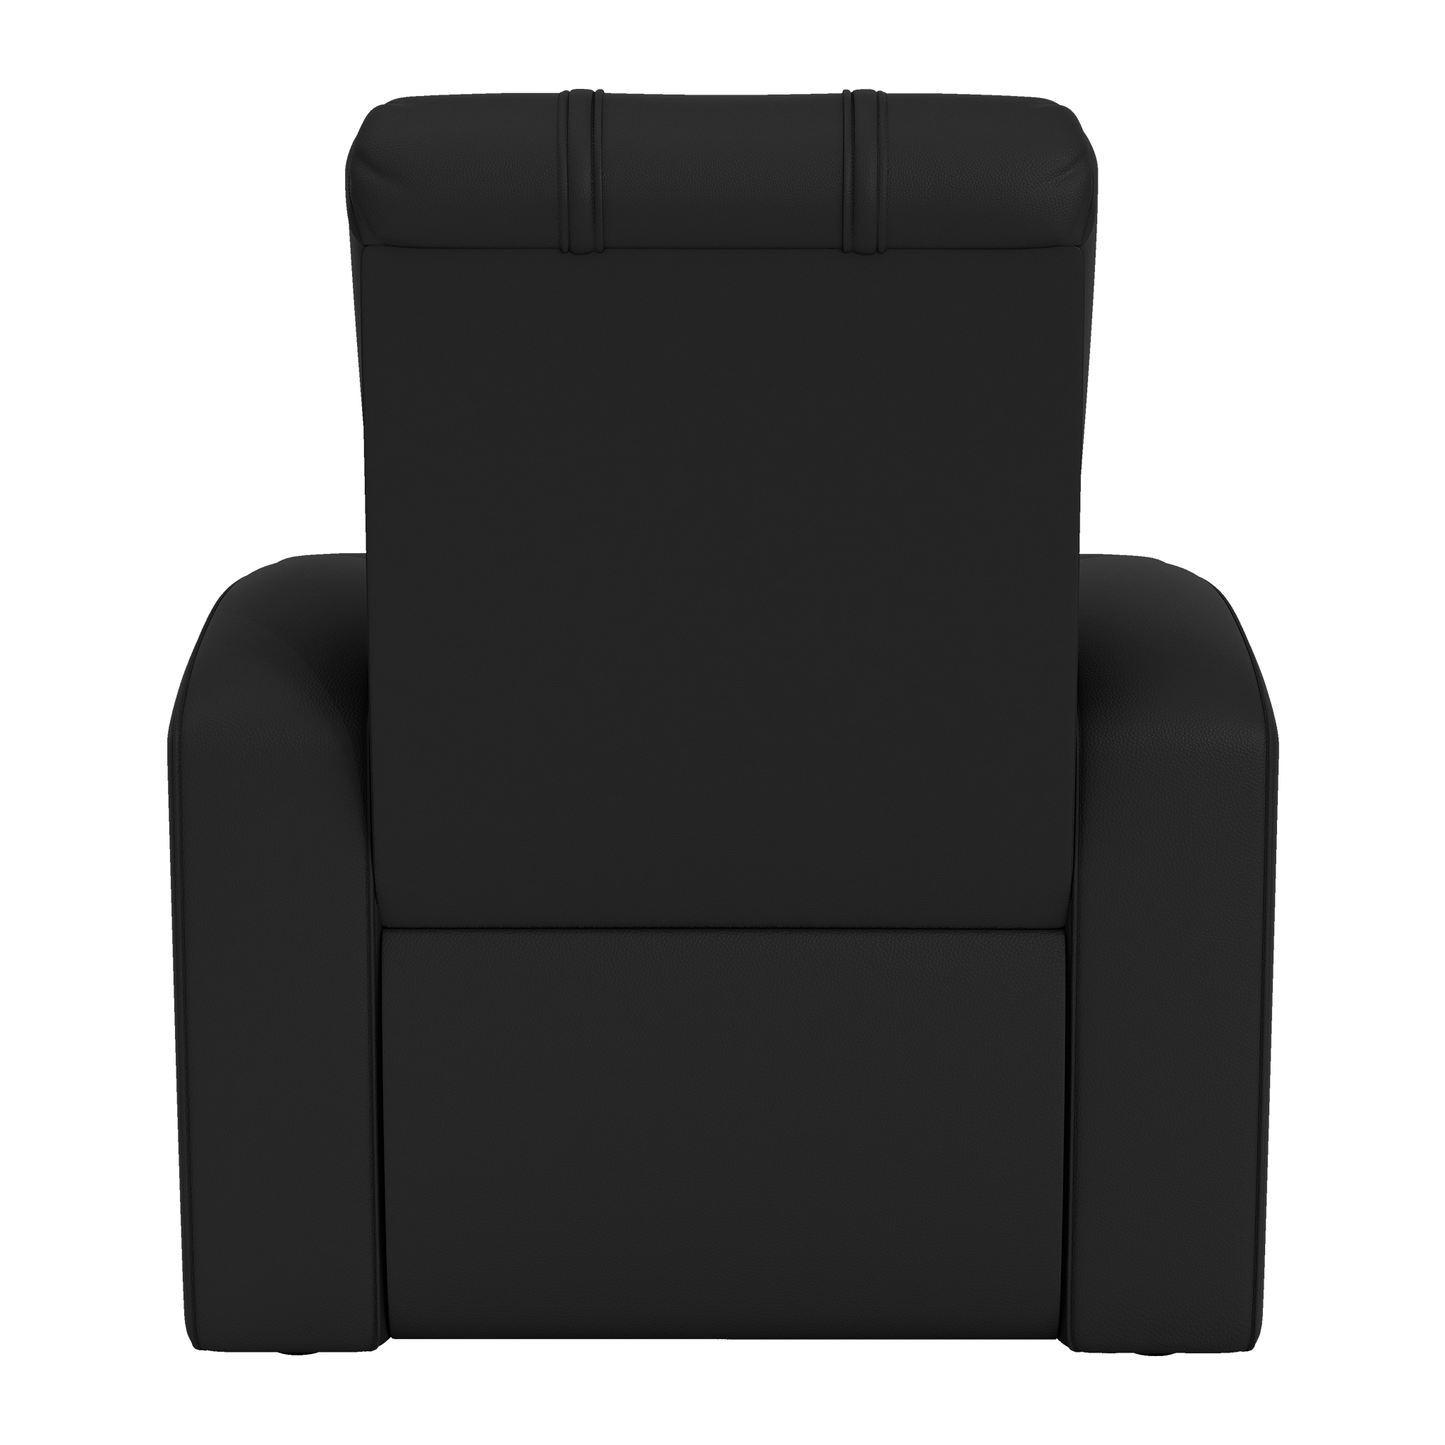 Relax Home Theater Recliner with Shoulda Been Stars Icon Logo